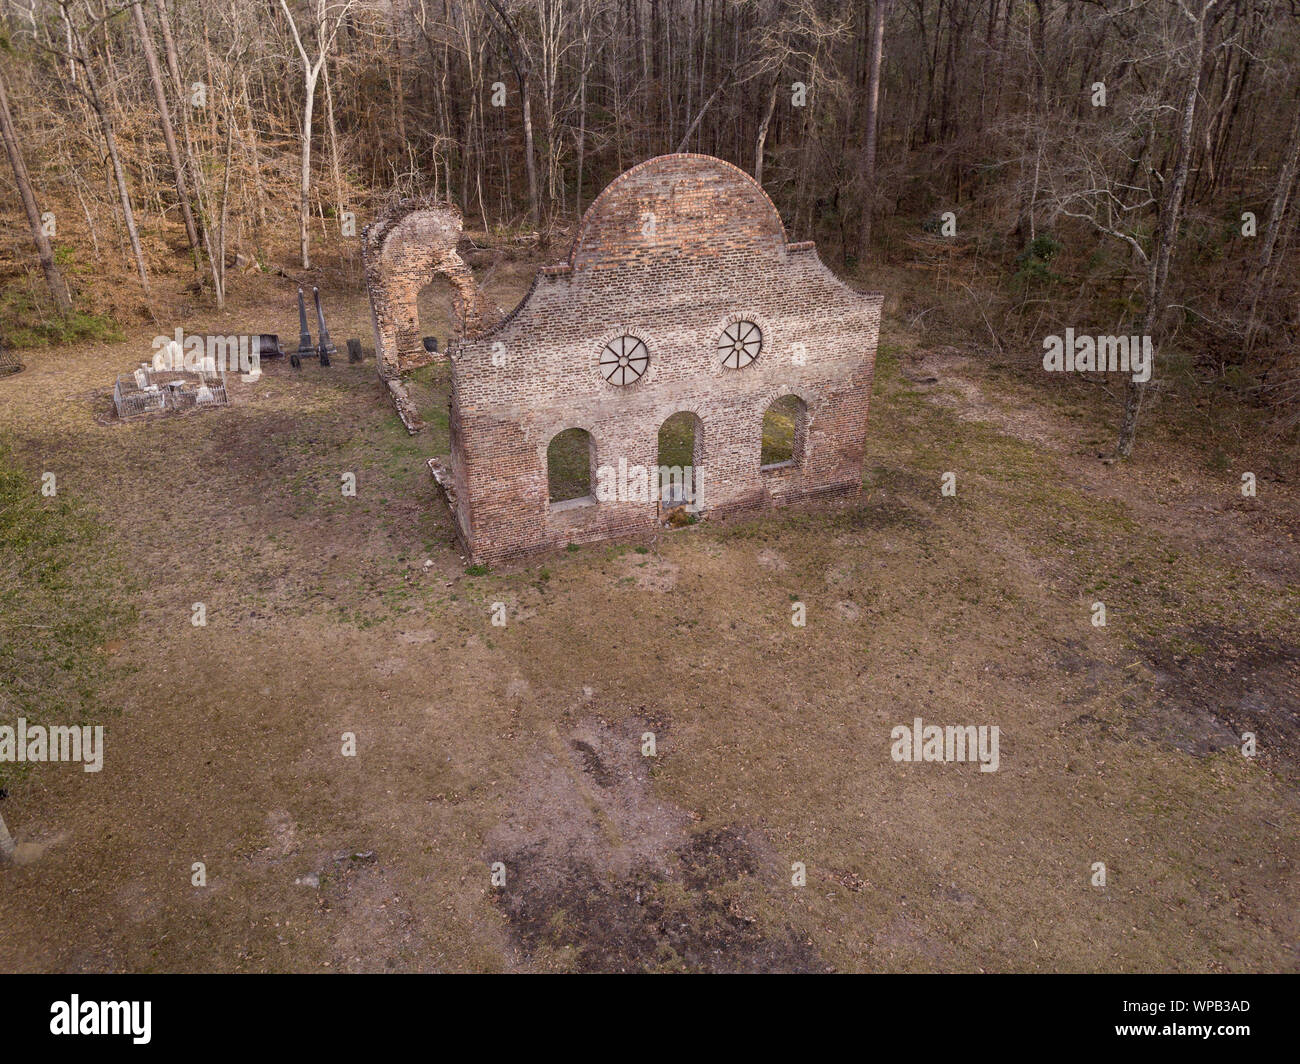 JACKSONBORO, SOUTH CAROLINA, USA-FEBRUARY 15, 2018: The ruins of the Pon Pon Chapel of Ease, built in 1820 in Jacksonboro, South Carolina. It was loca Stock Photo